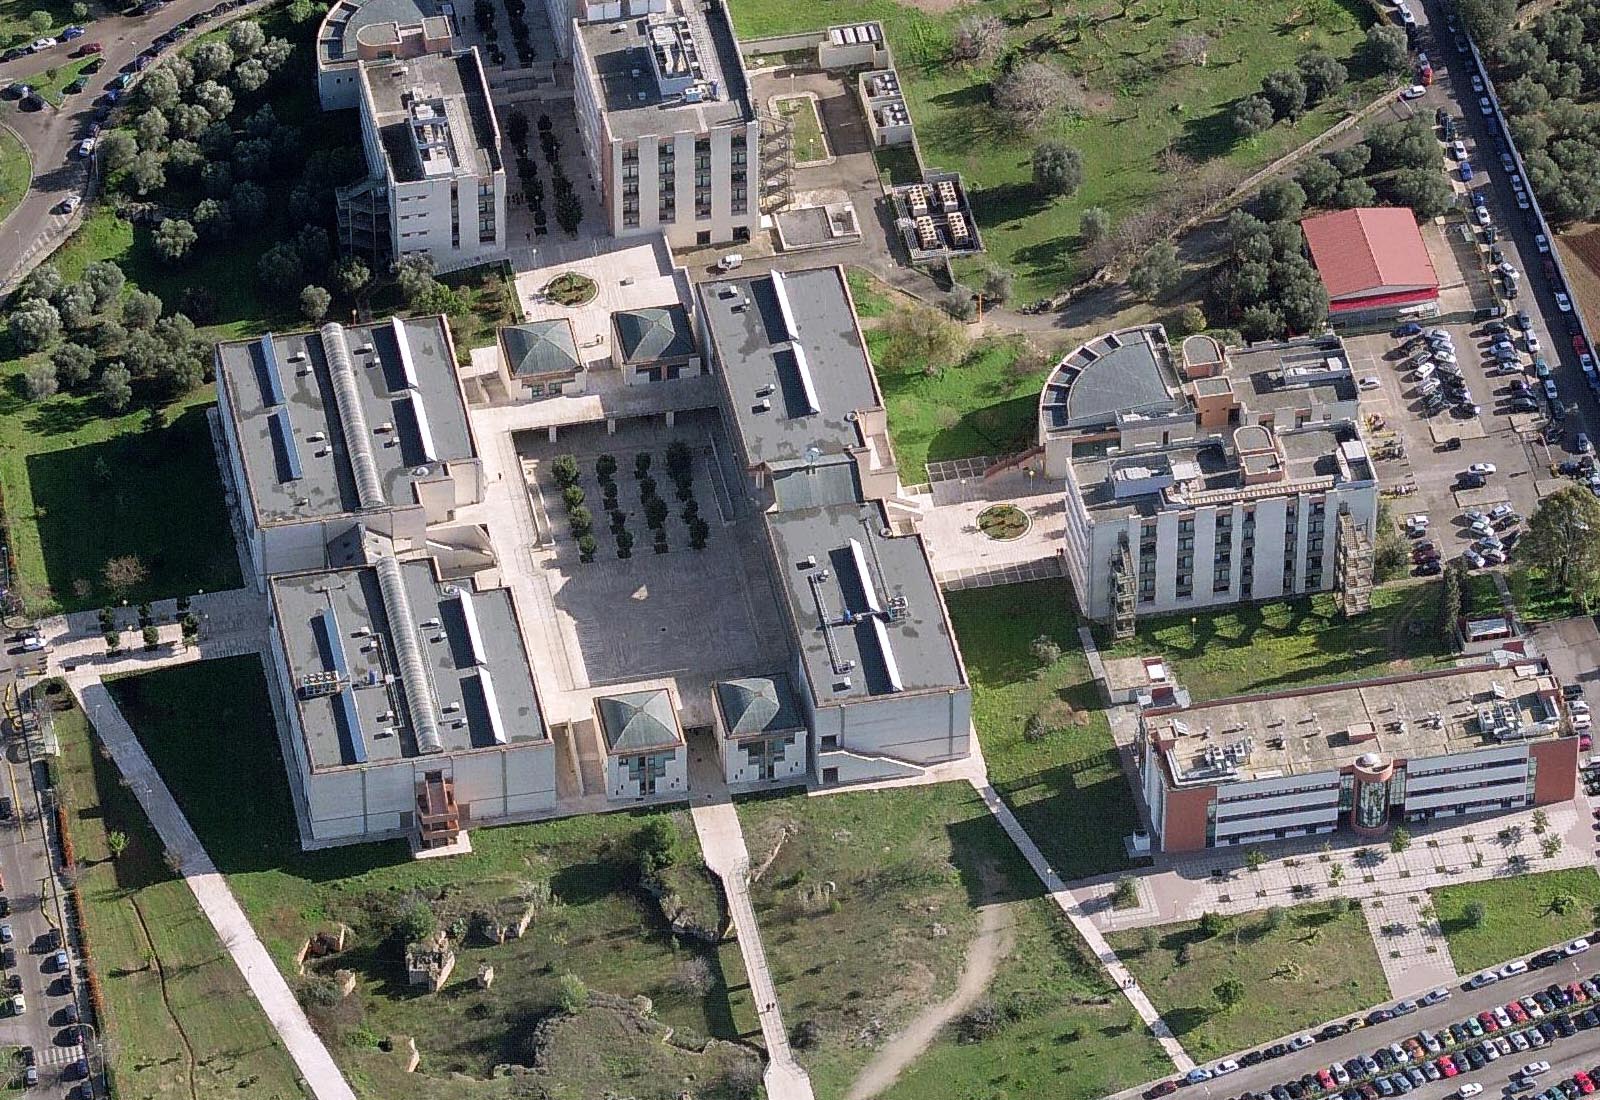 Ecotekne university center in Lecce - The classrooms building and the departmental buildings